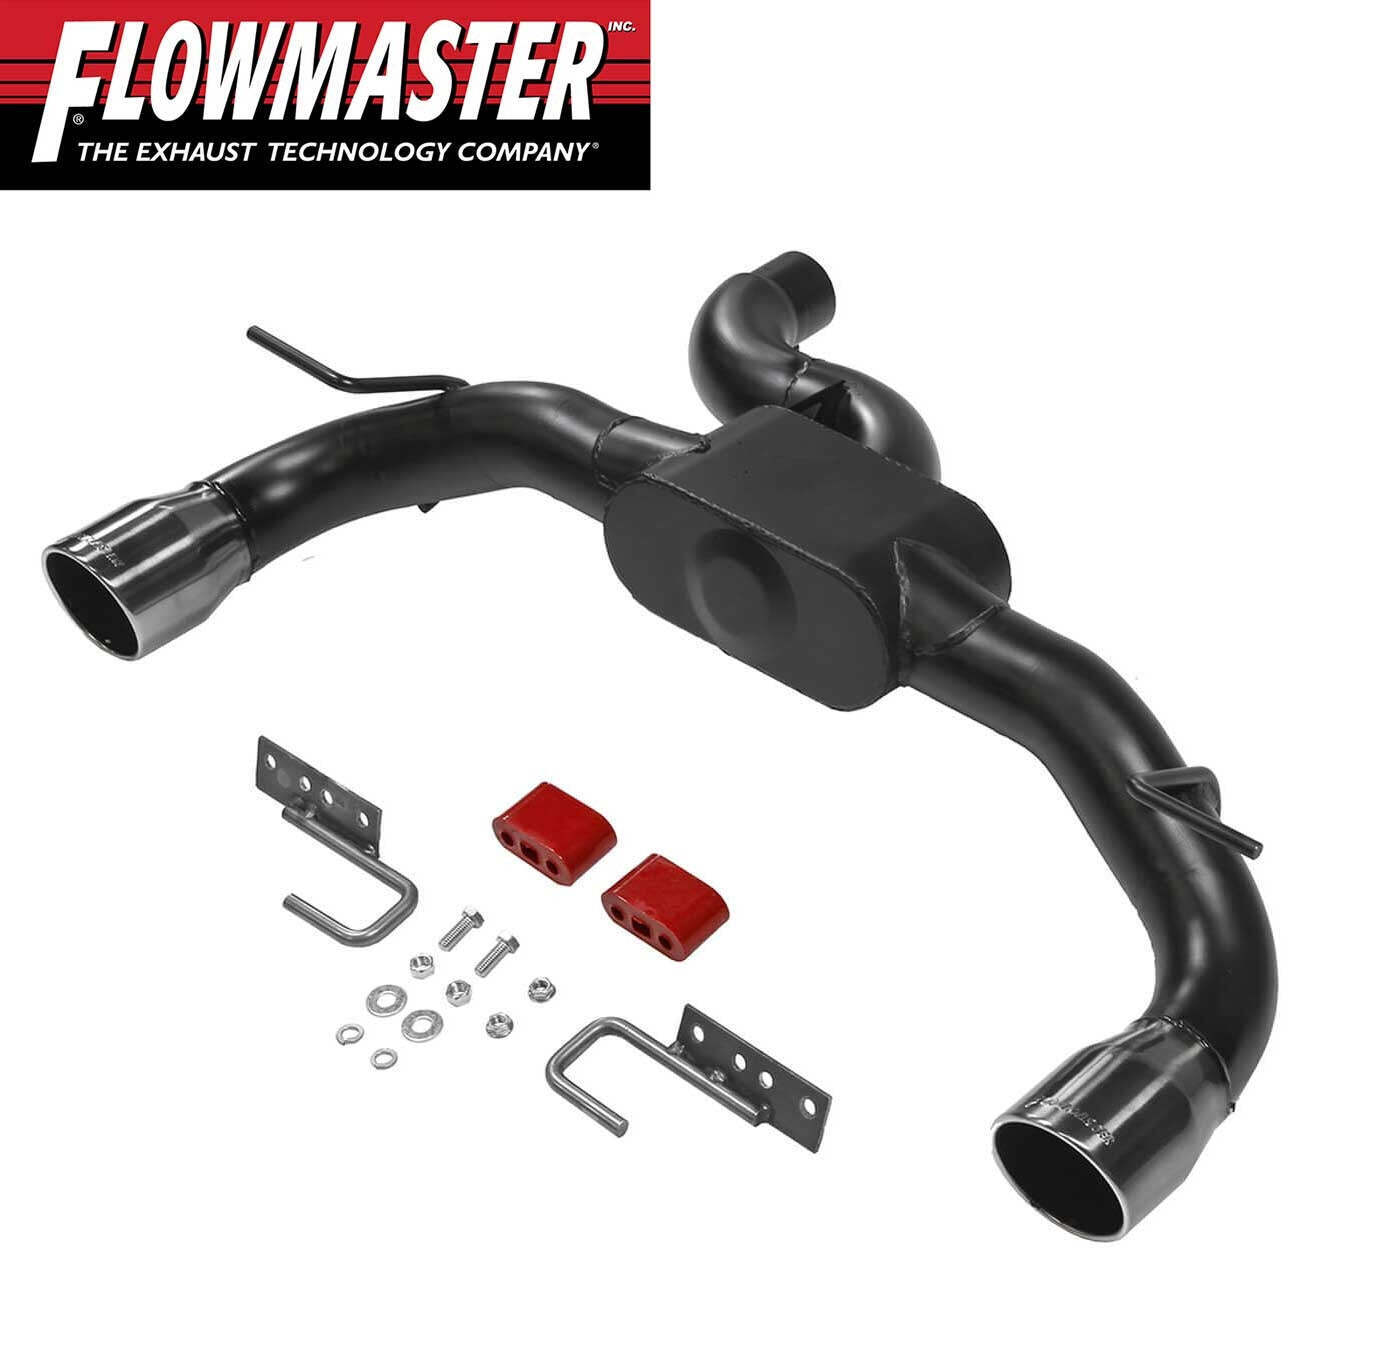 2021-2024 Ford Bronco Flowmaster Outlaw Axle Back Exhaust System w 4